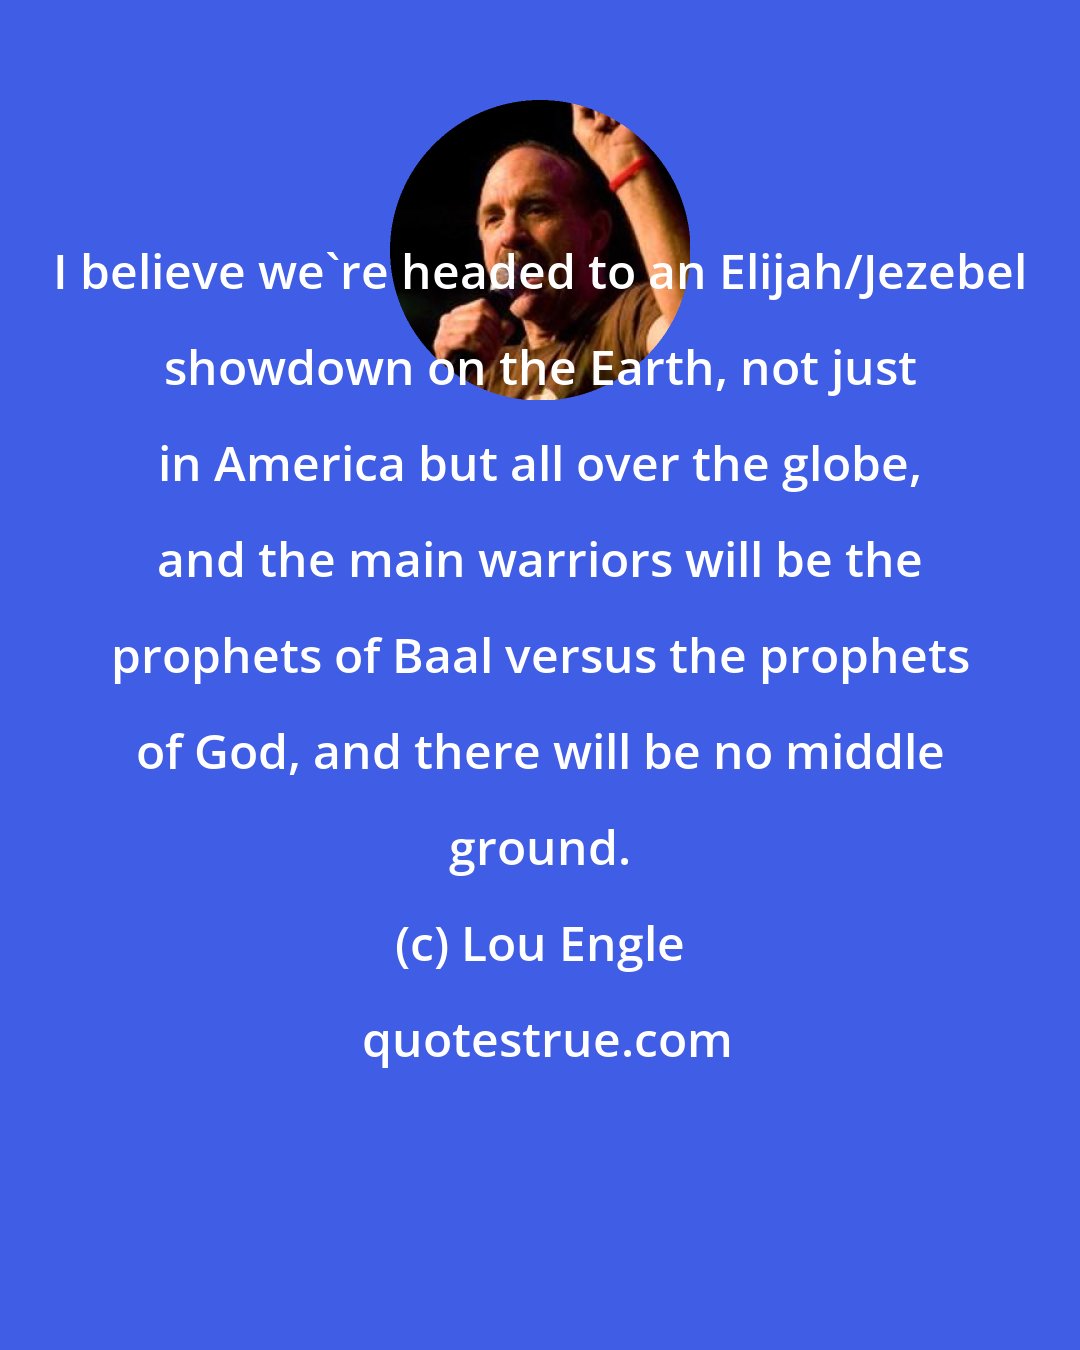 Lou Engle: I believe we're headed to an Elijah/Jezebel showdown on the Earth, not just in America but all over the globe, and the main warriors will be the prophets of Baal versus the prophets of God, and there will be no middle ground.